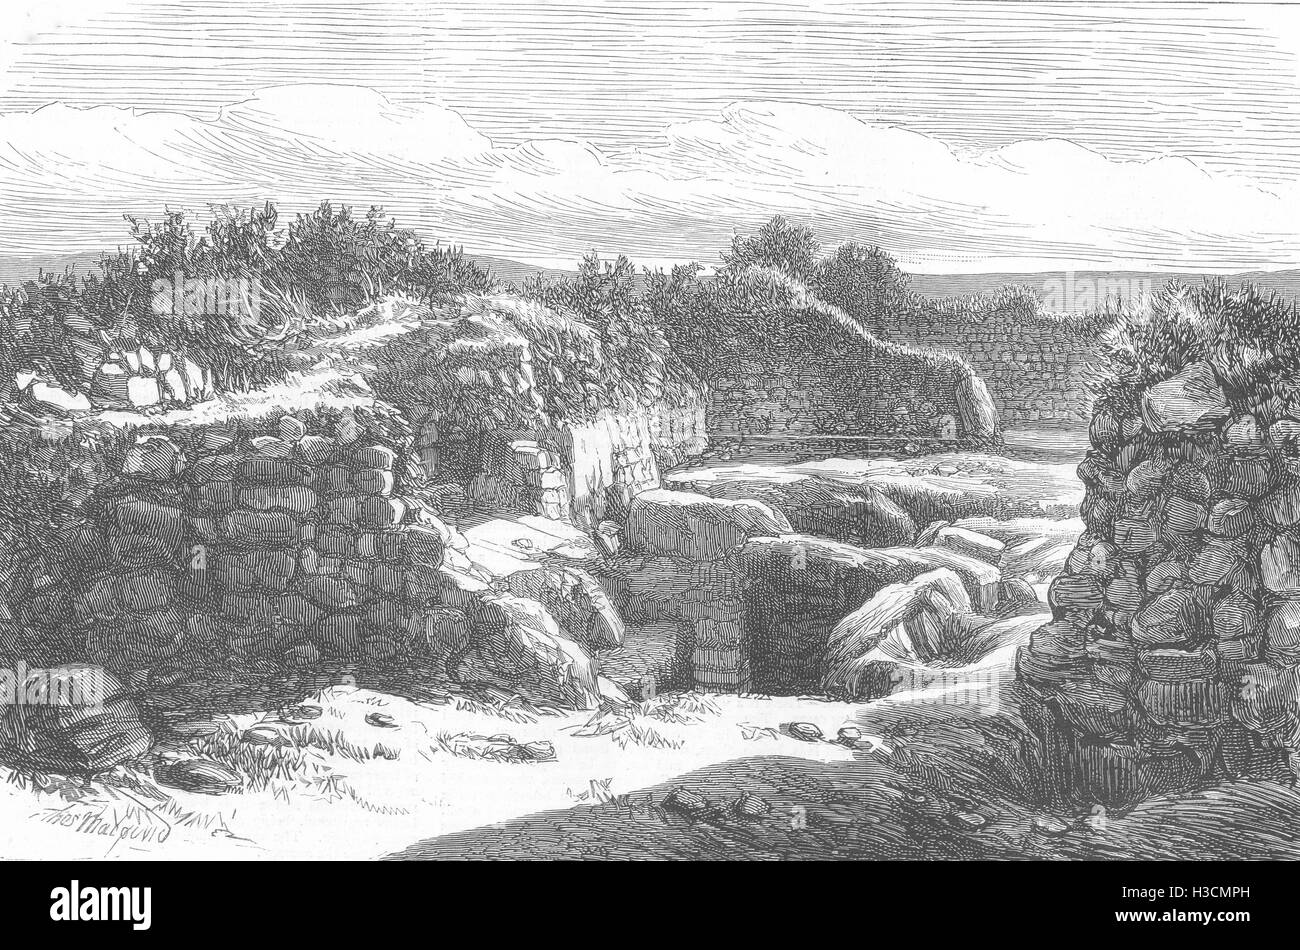 MORBIHAN A Buried city-Excavations at Carnac, Brittany 1875. The Graphic Stock Photo